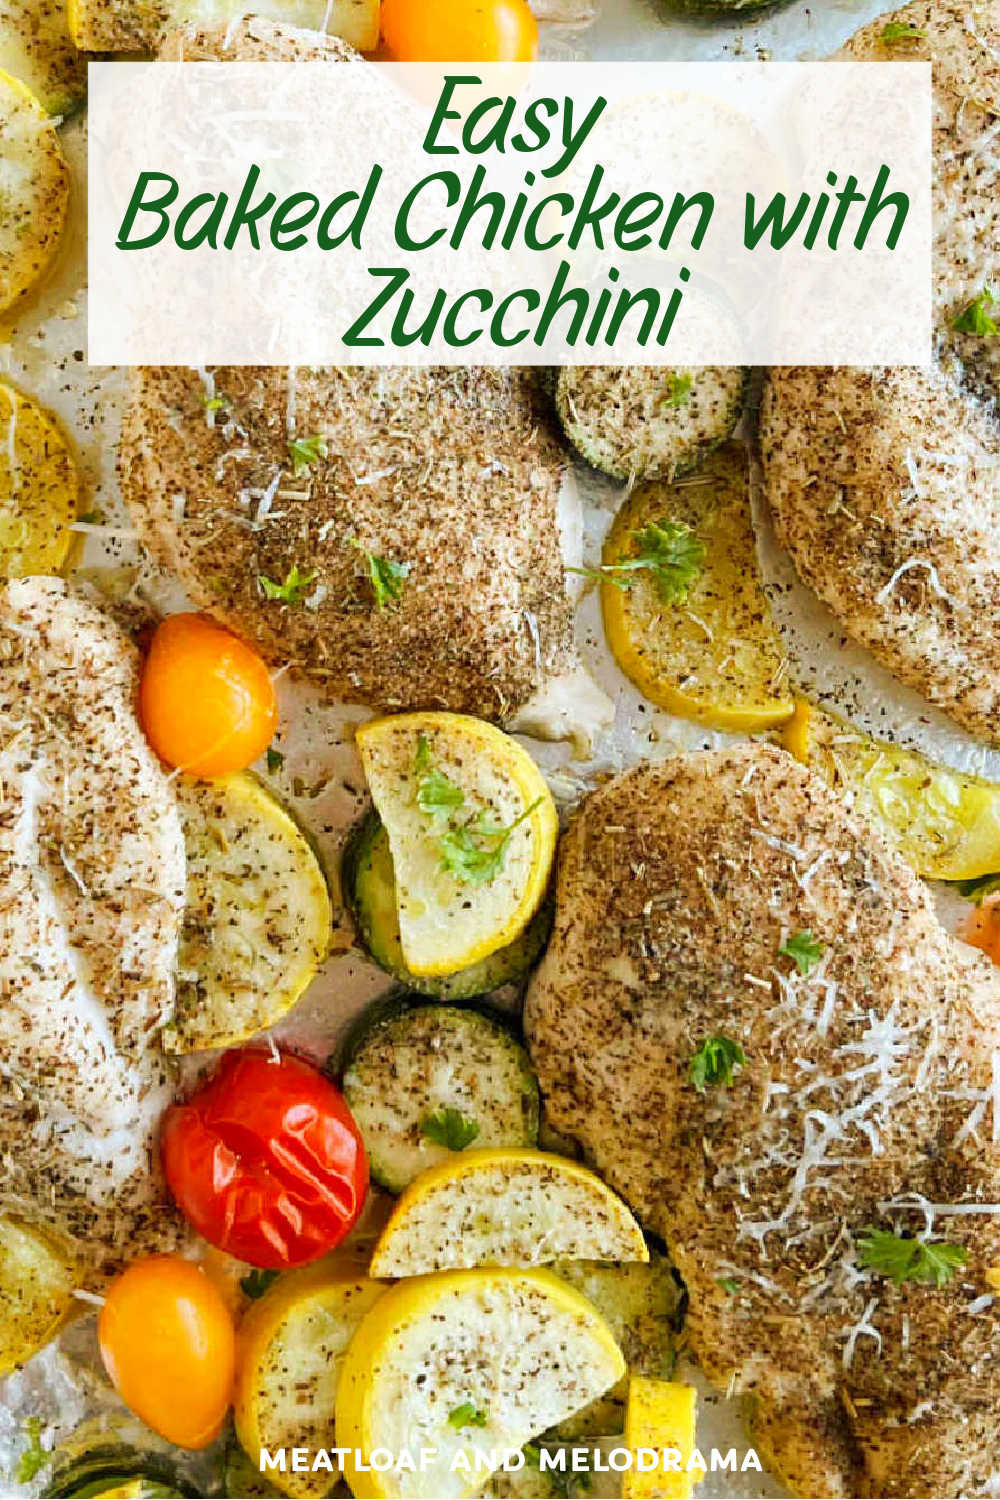 Easy Baked Chicken with Zucchini and yellow squash is an easy sheet pan dinner perfect for busy weeknights. This easy recipe is a great way to use up garden fresh zucchini and takes just 20 minutes to cook! via @meamel